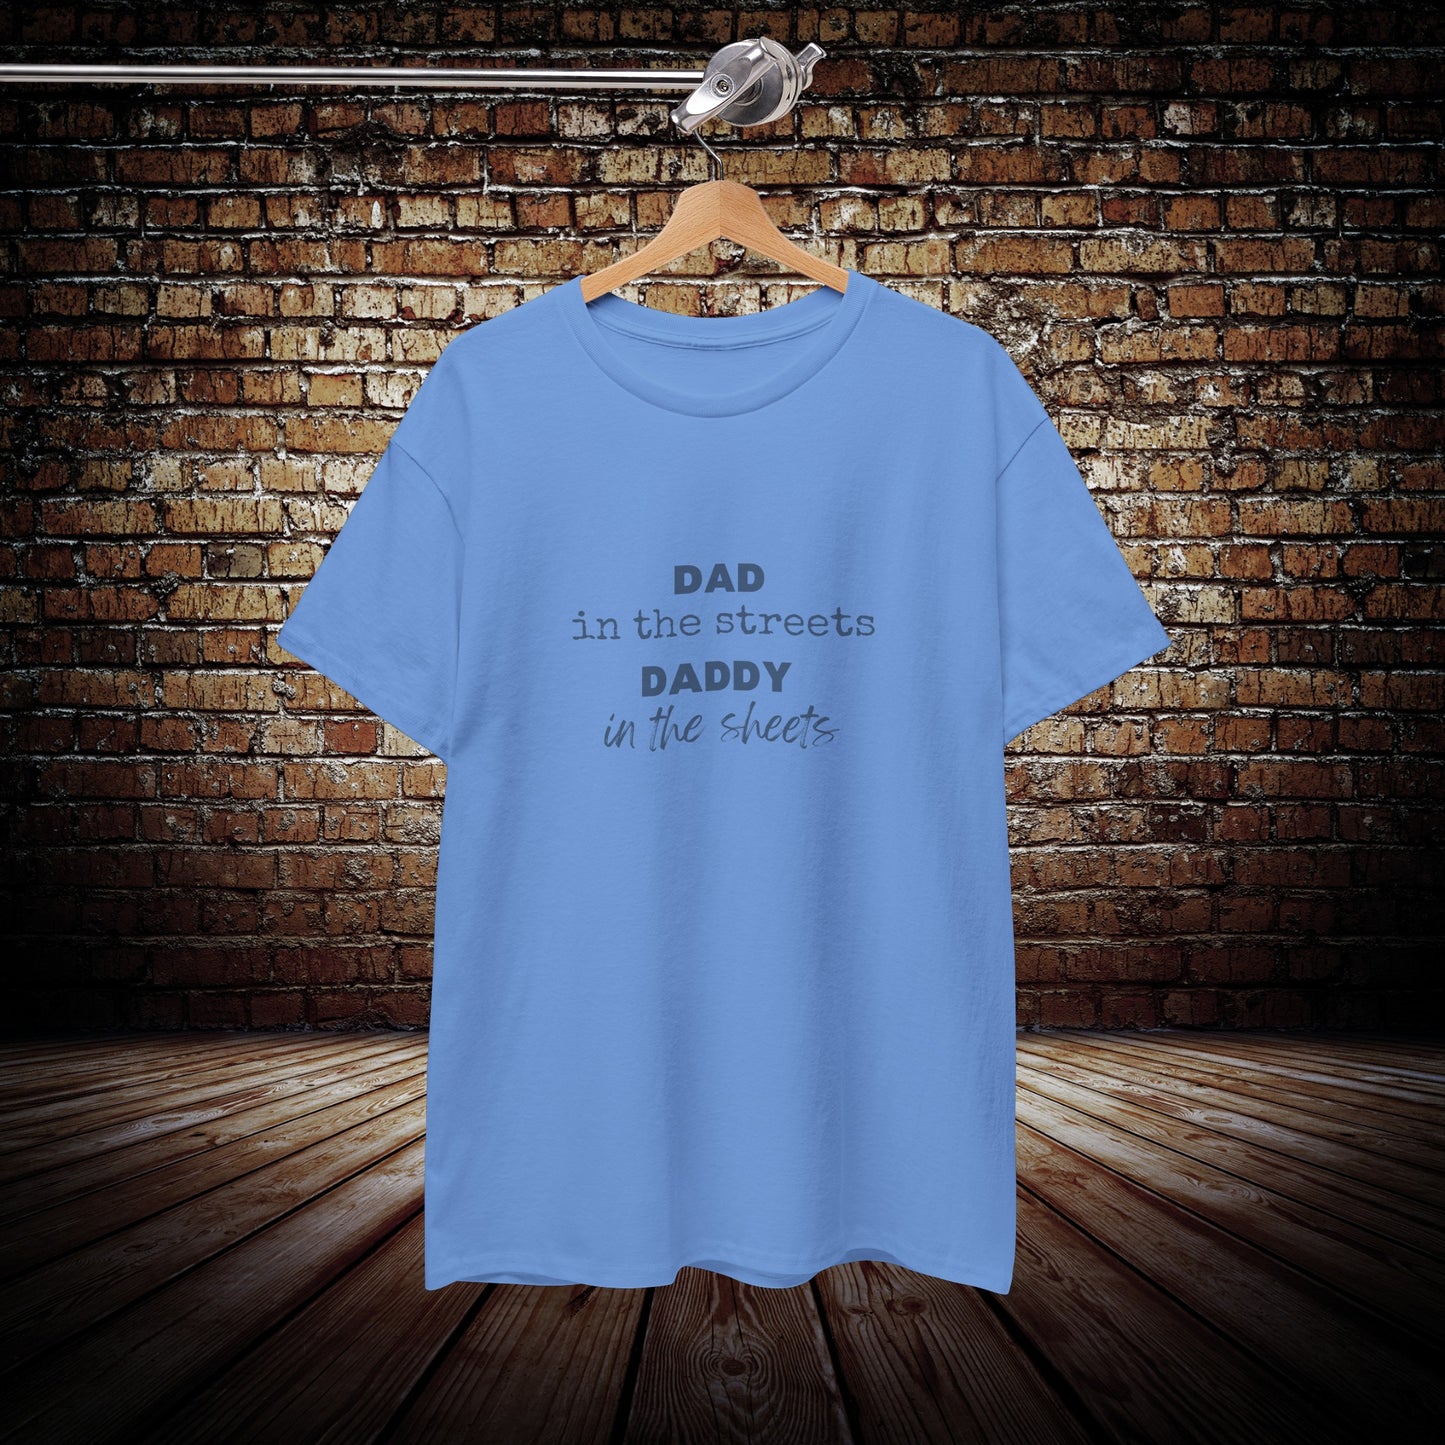 Dad in the streets funny dad shirt